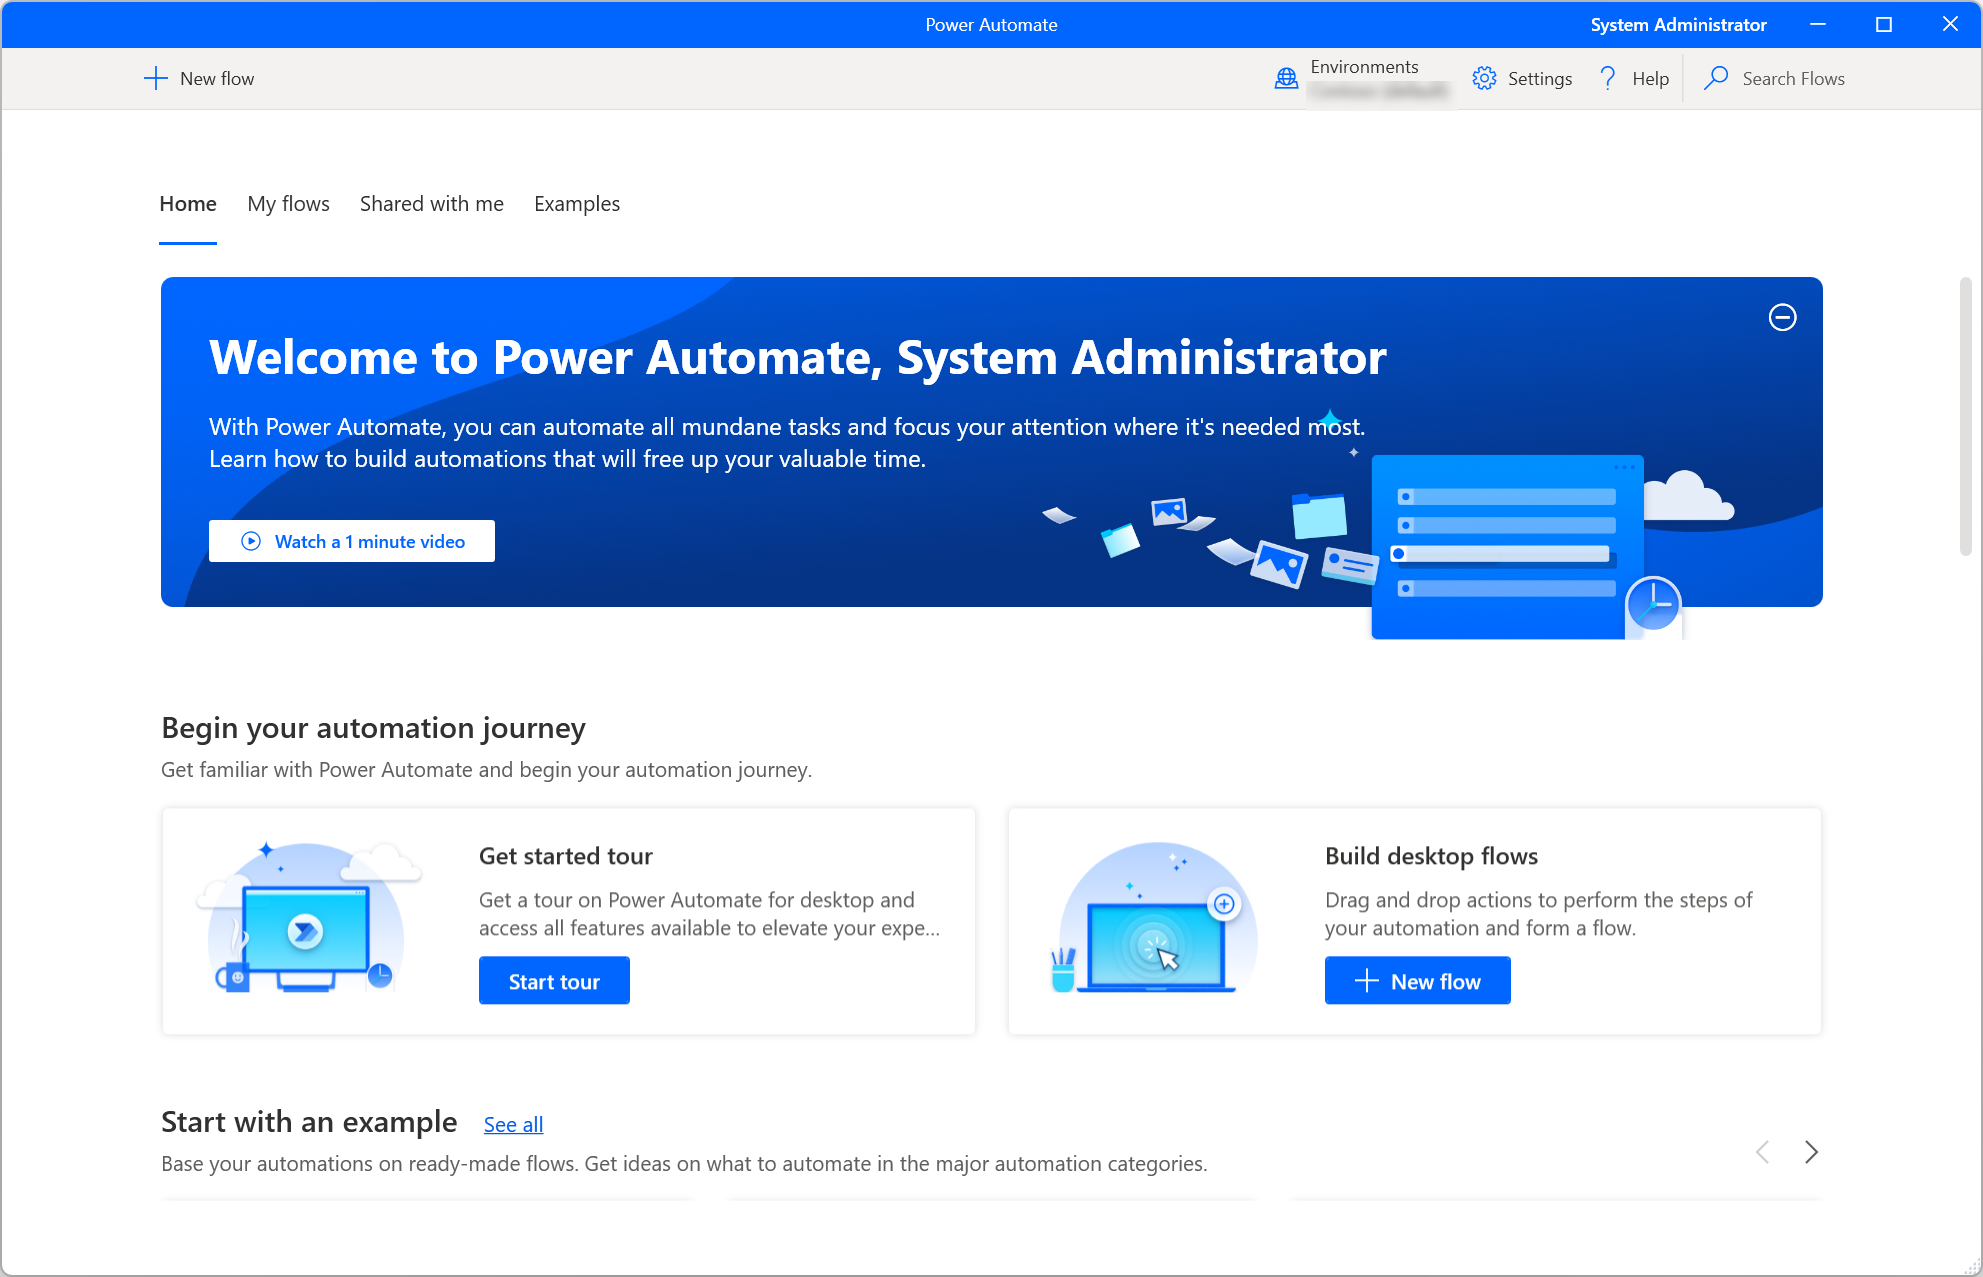 Console Power Automate - Power Automate | Microsoft Learn